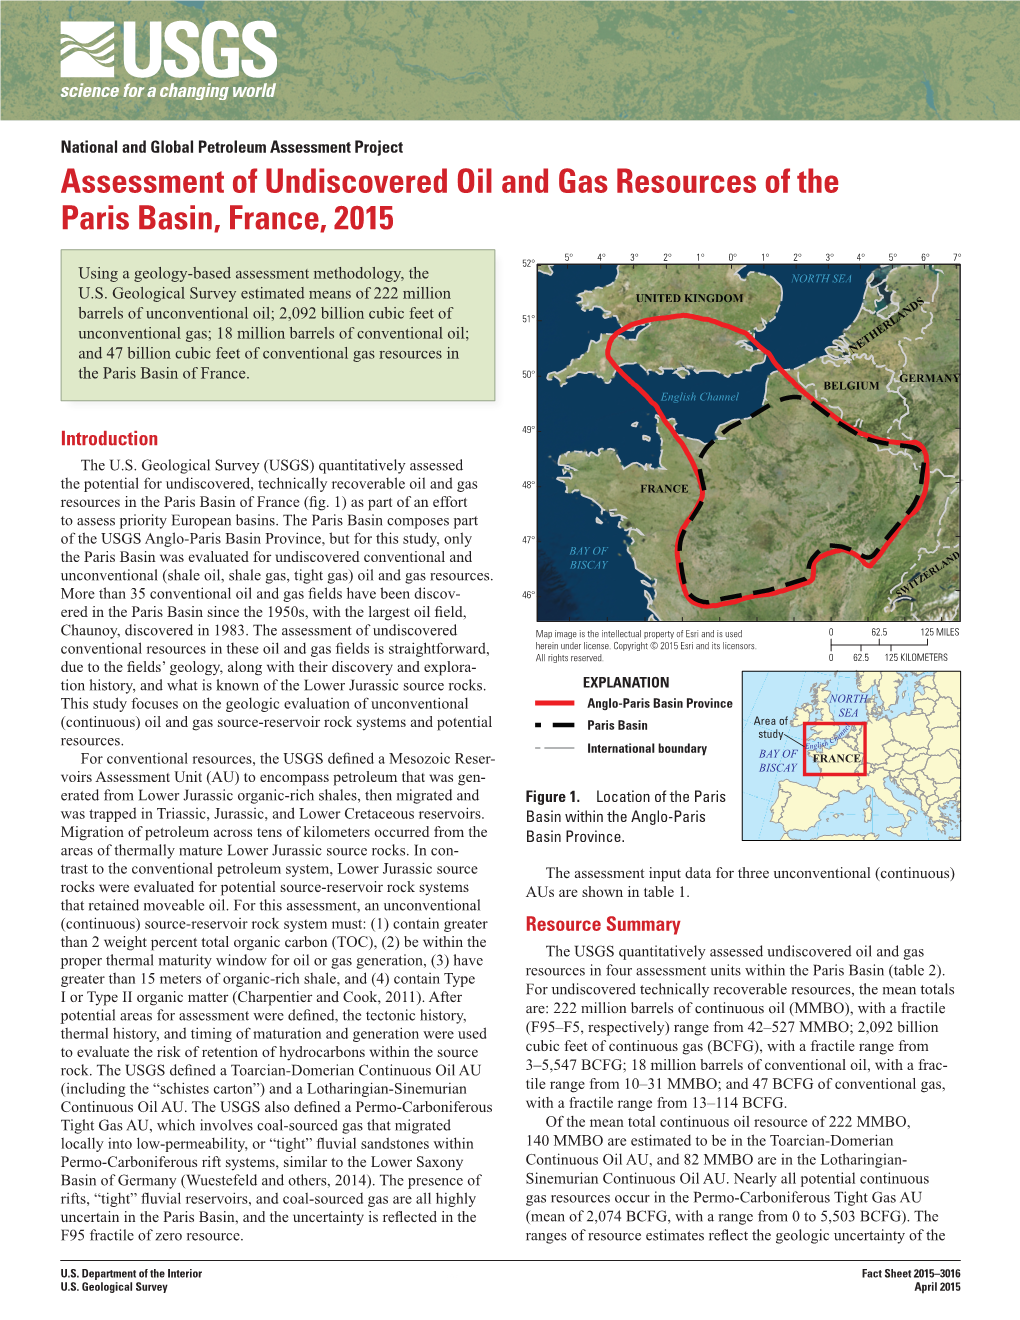 Assessment of Undiscovered Oil and Gas Resources of the Paris Basin, France, 2015